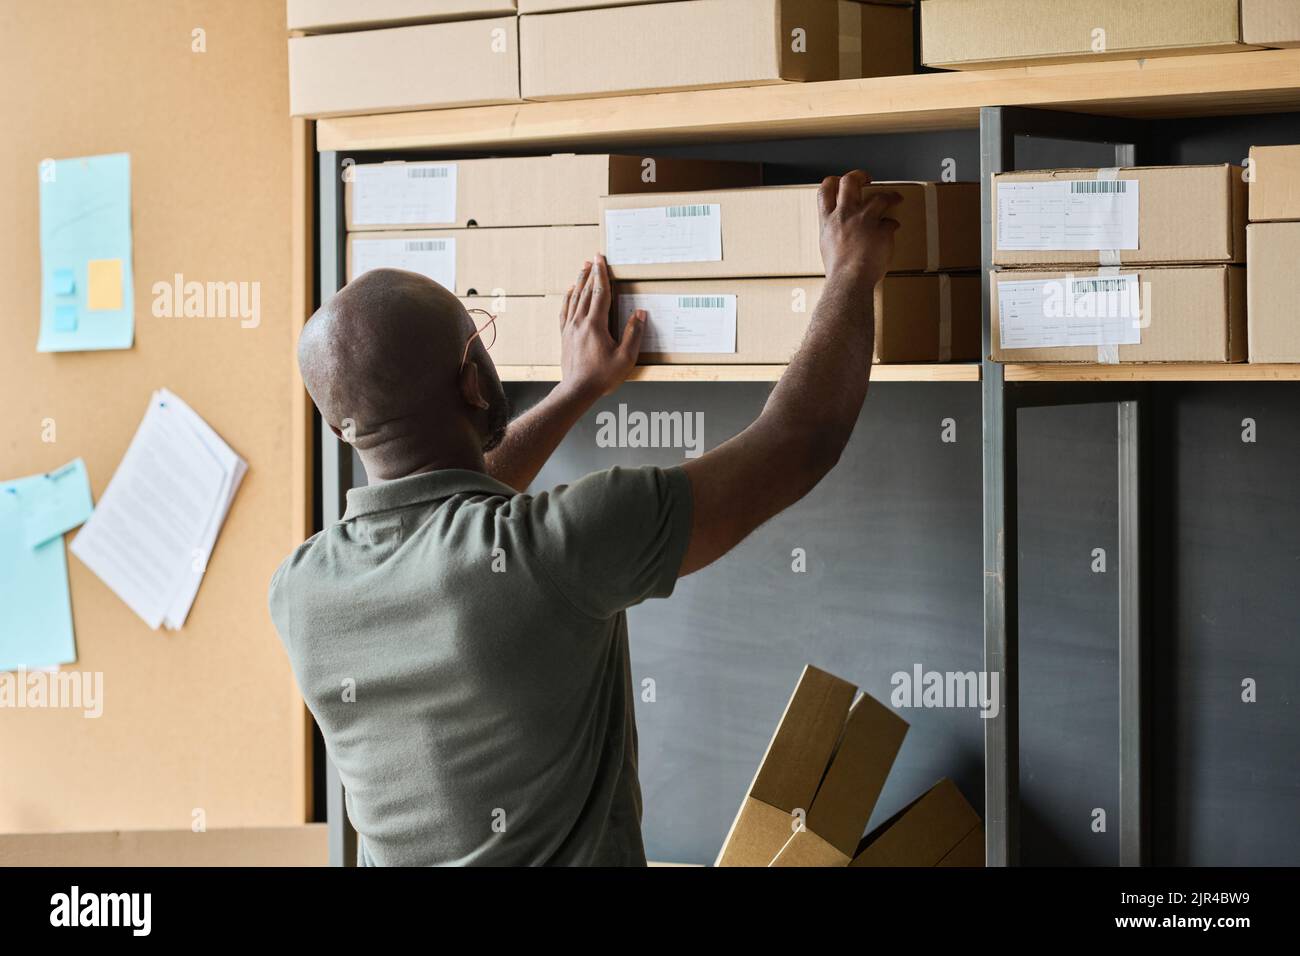 Rear view of African man putting finishes parcels in cardboard boxes on shelf during his work in warehouse Stock Photo